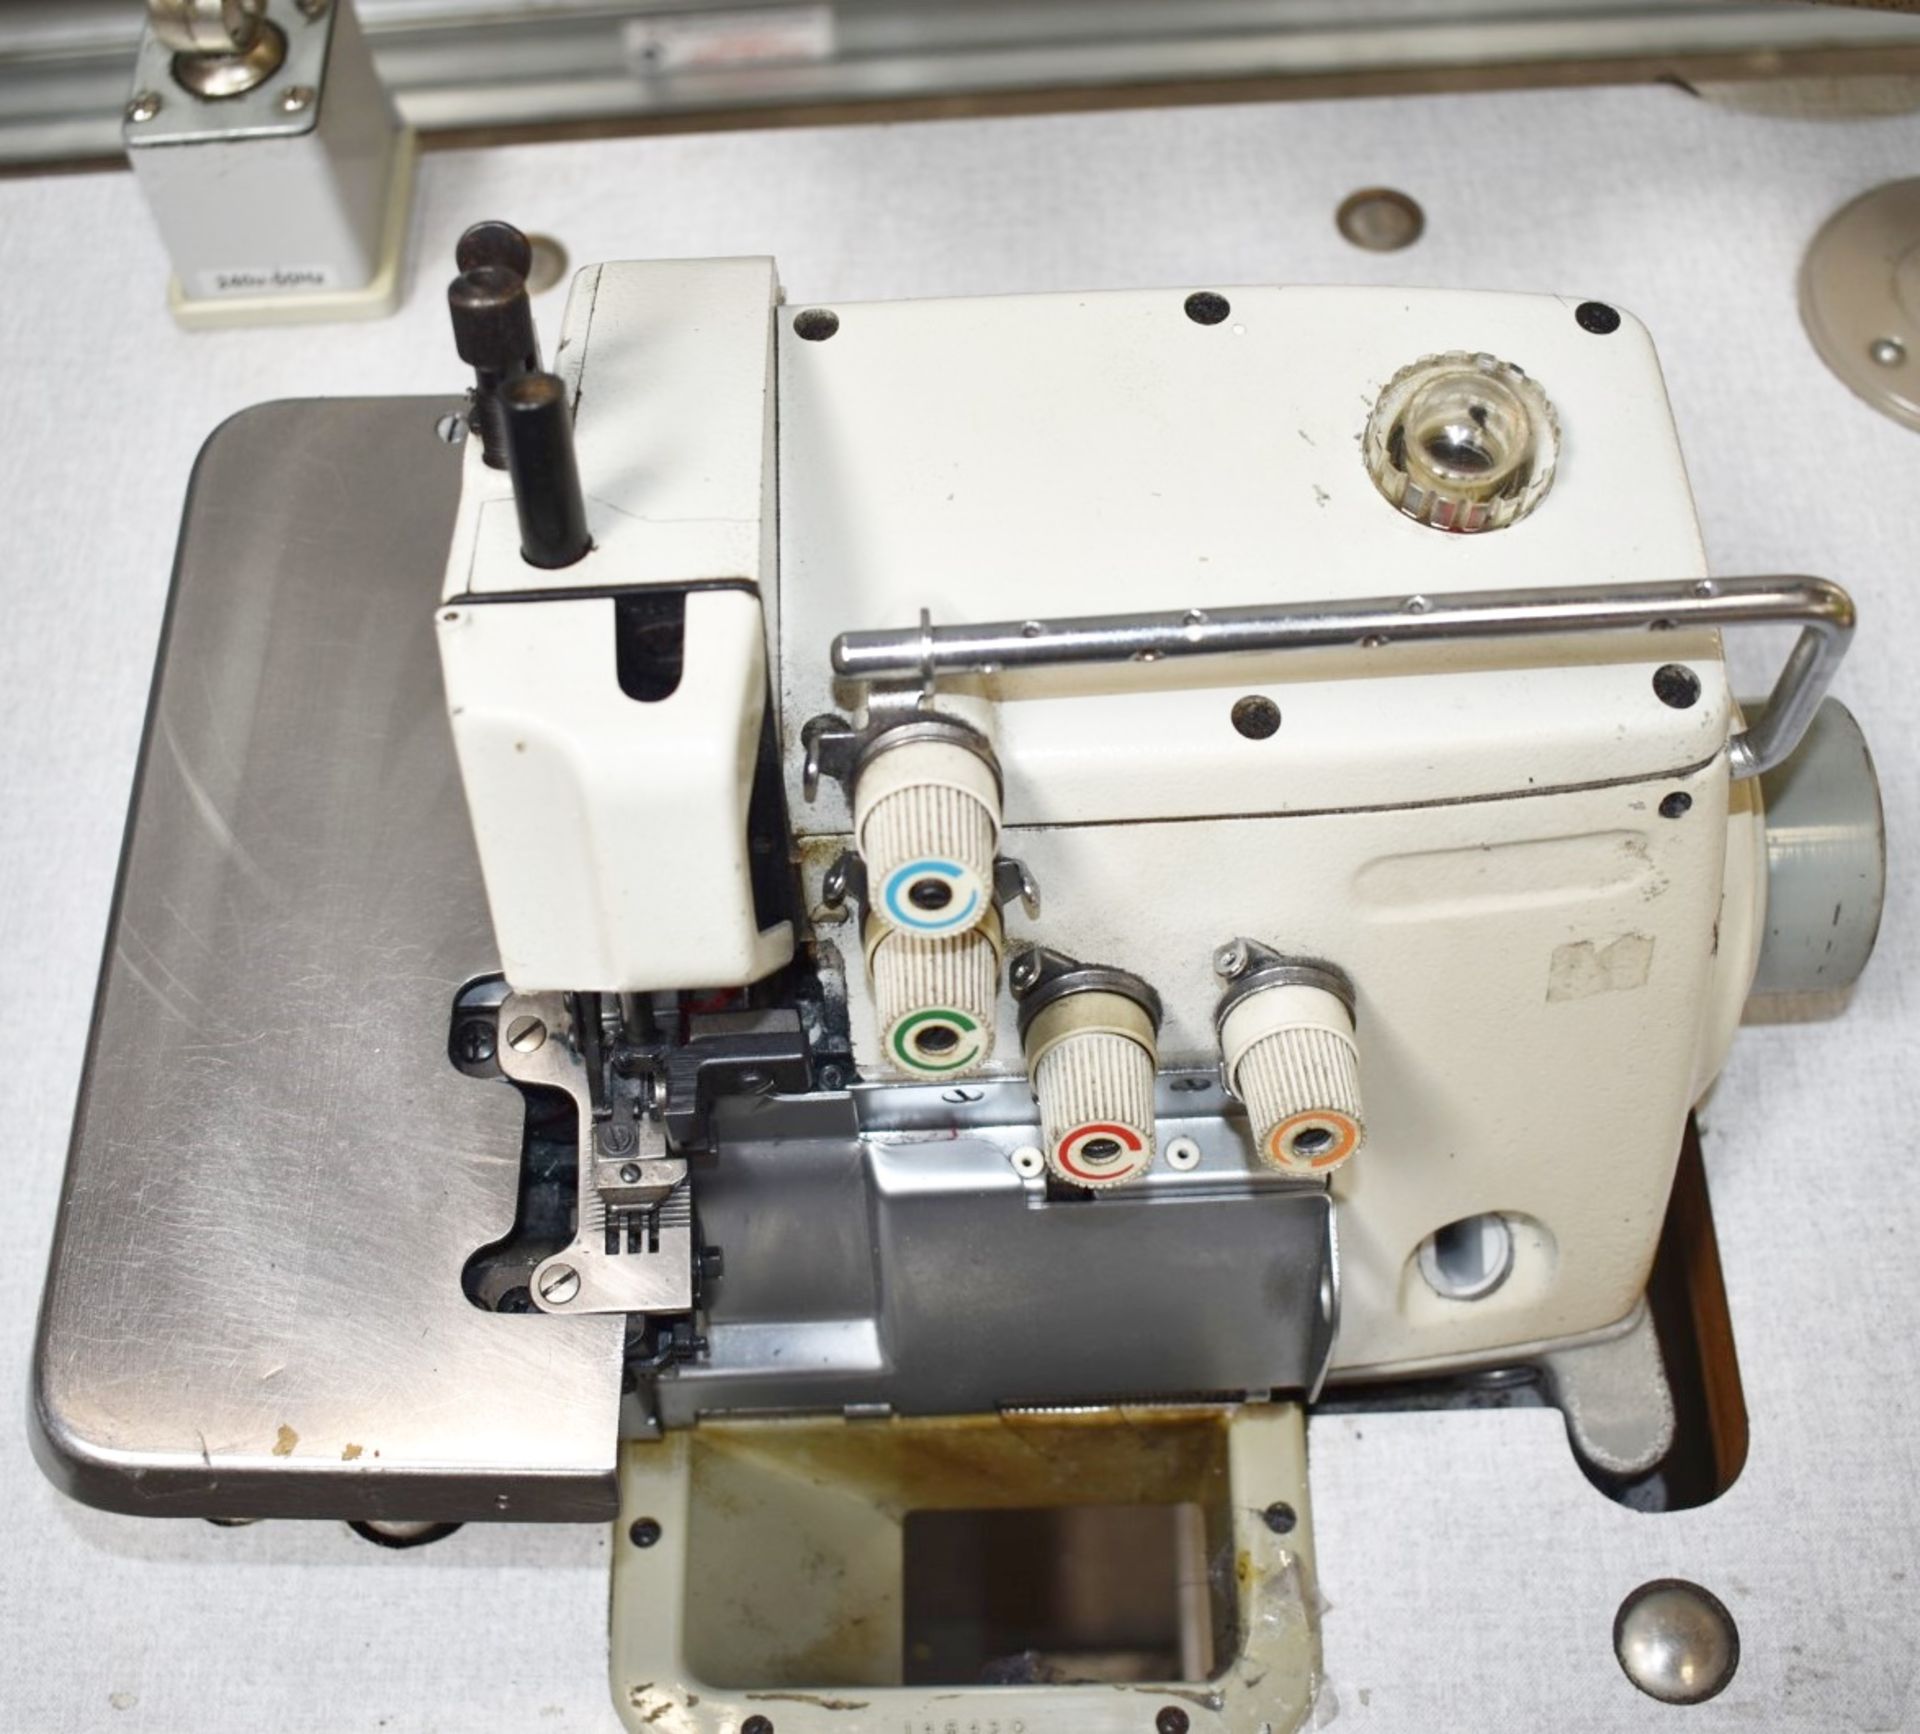 1 x Brother Overlock Industrial Sewing Machine - Model EF4-B531 - Image 14 of 27